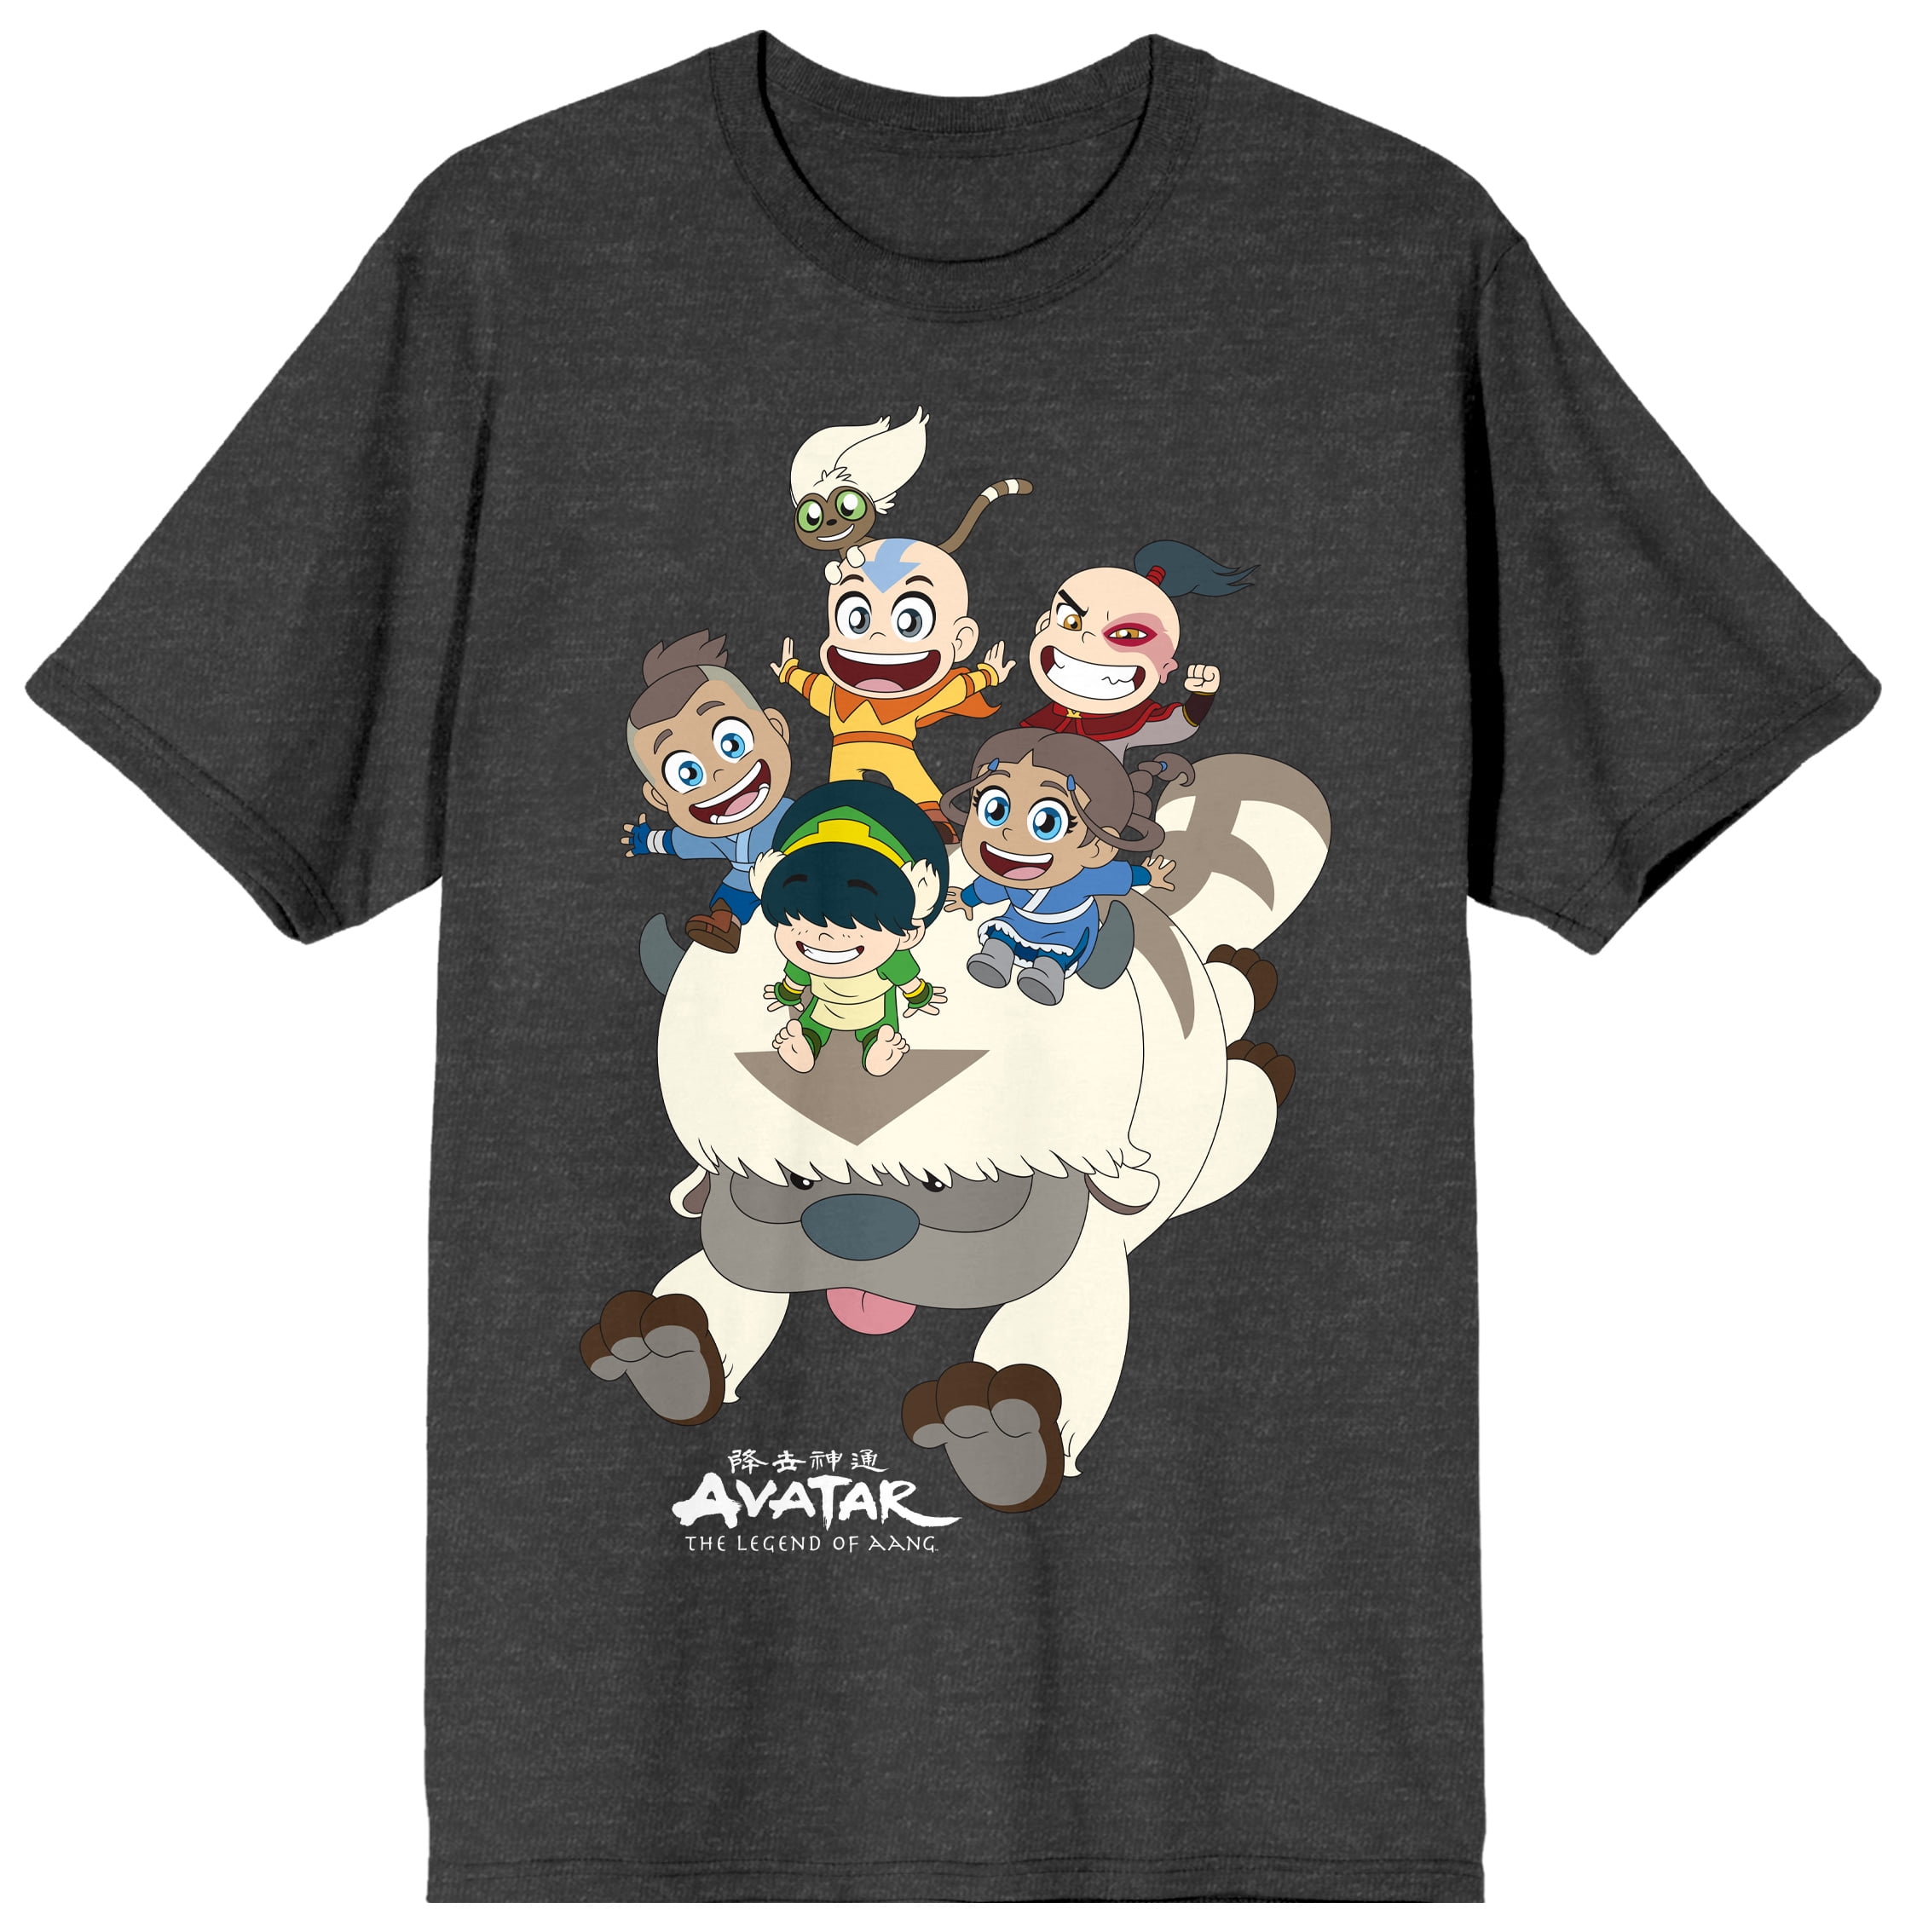 Official Avatar The Last Airbender Charcoal T-Shirt